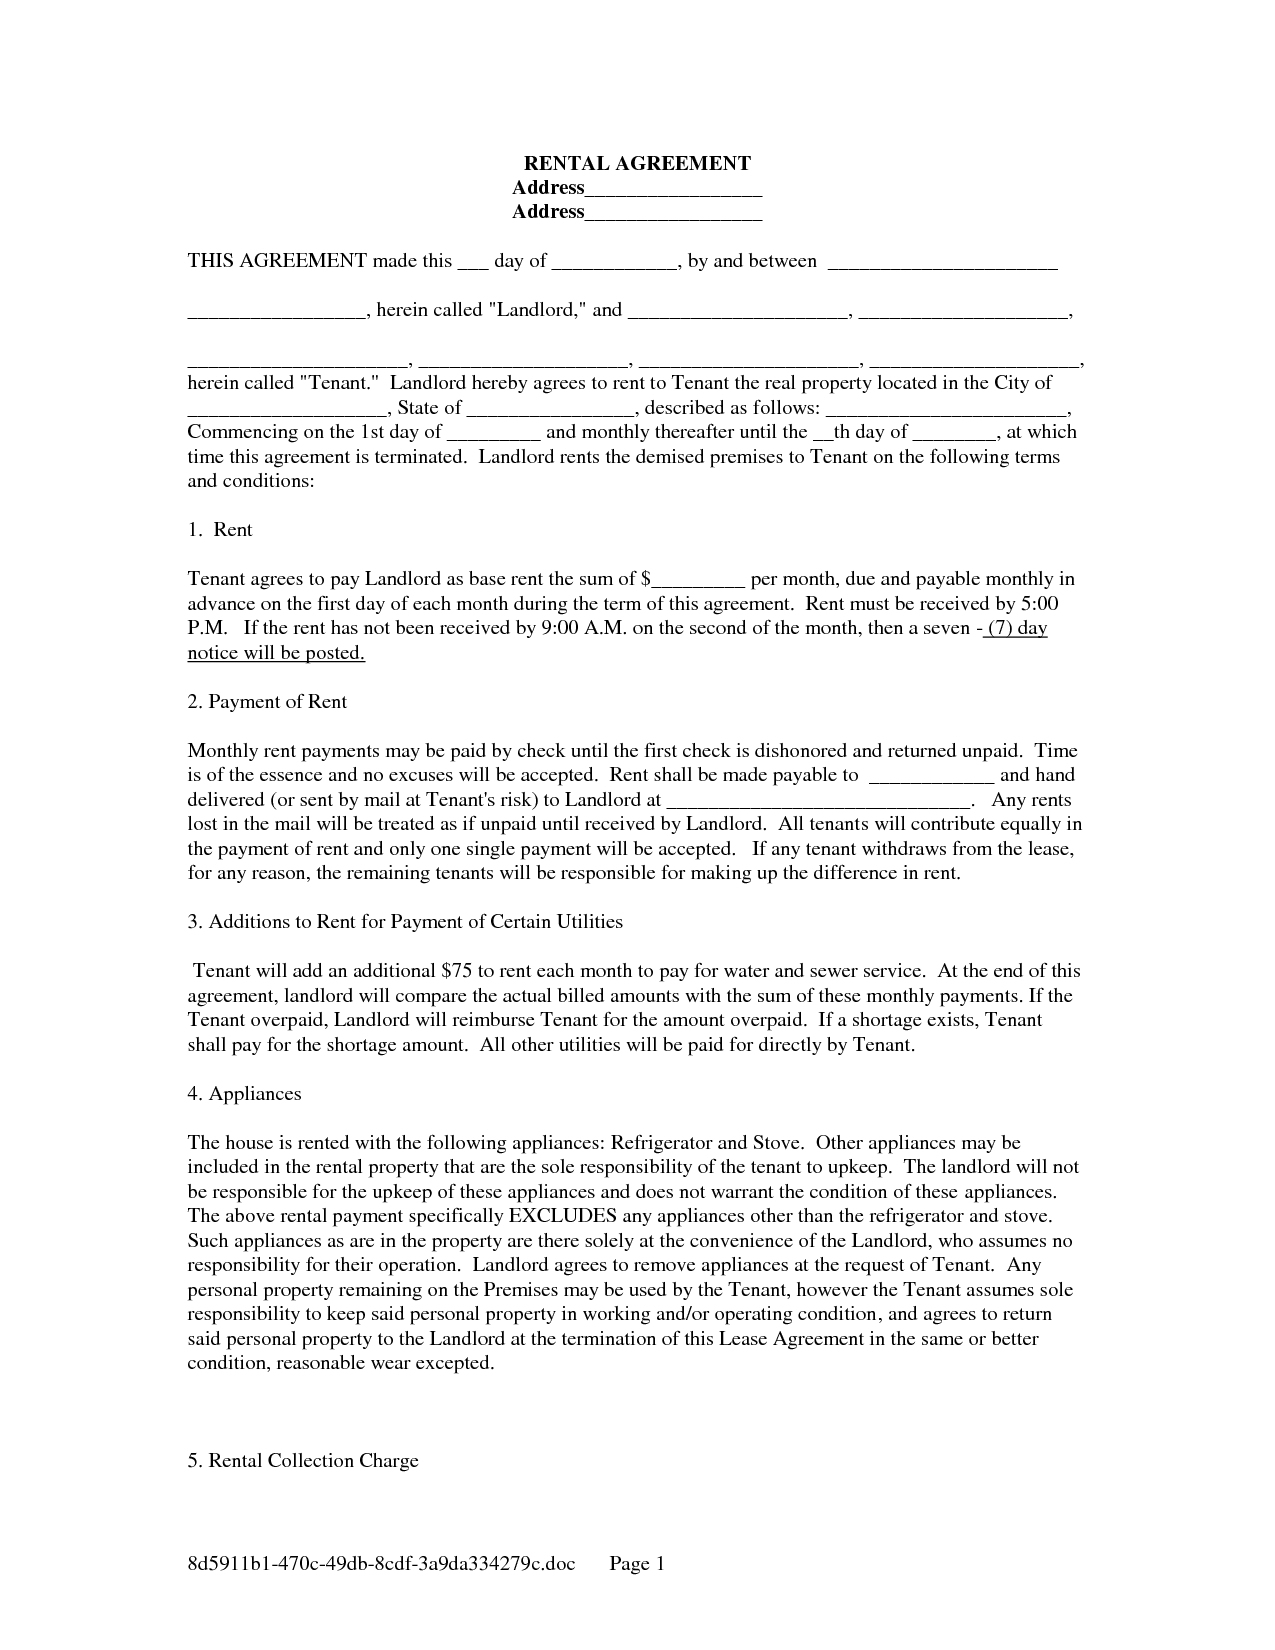 Printable Rental Lease Agreement Form For Free | Shop Fresh - Free Printable Rental Lease Agreement